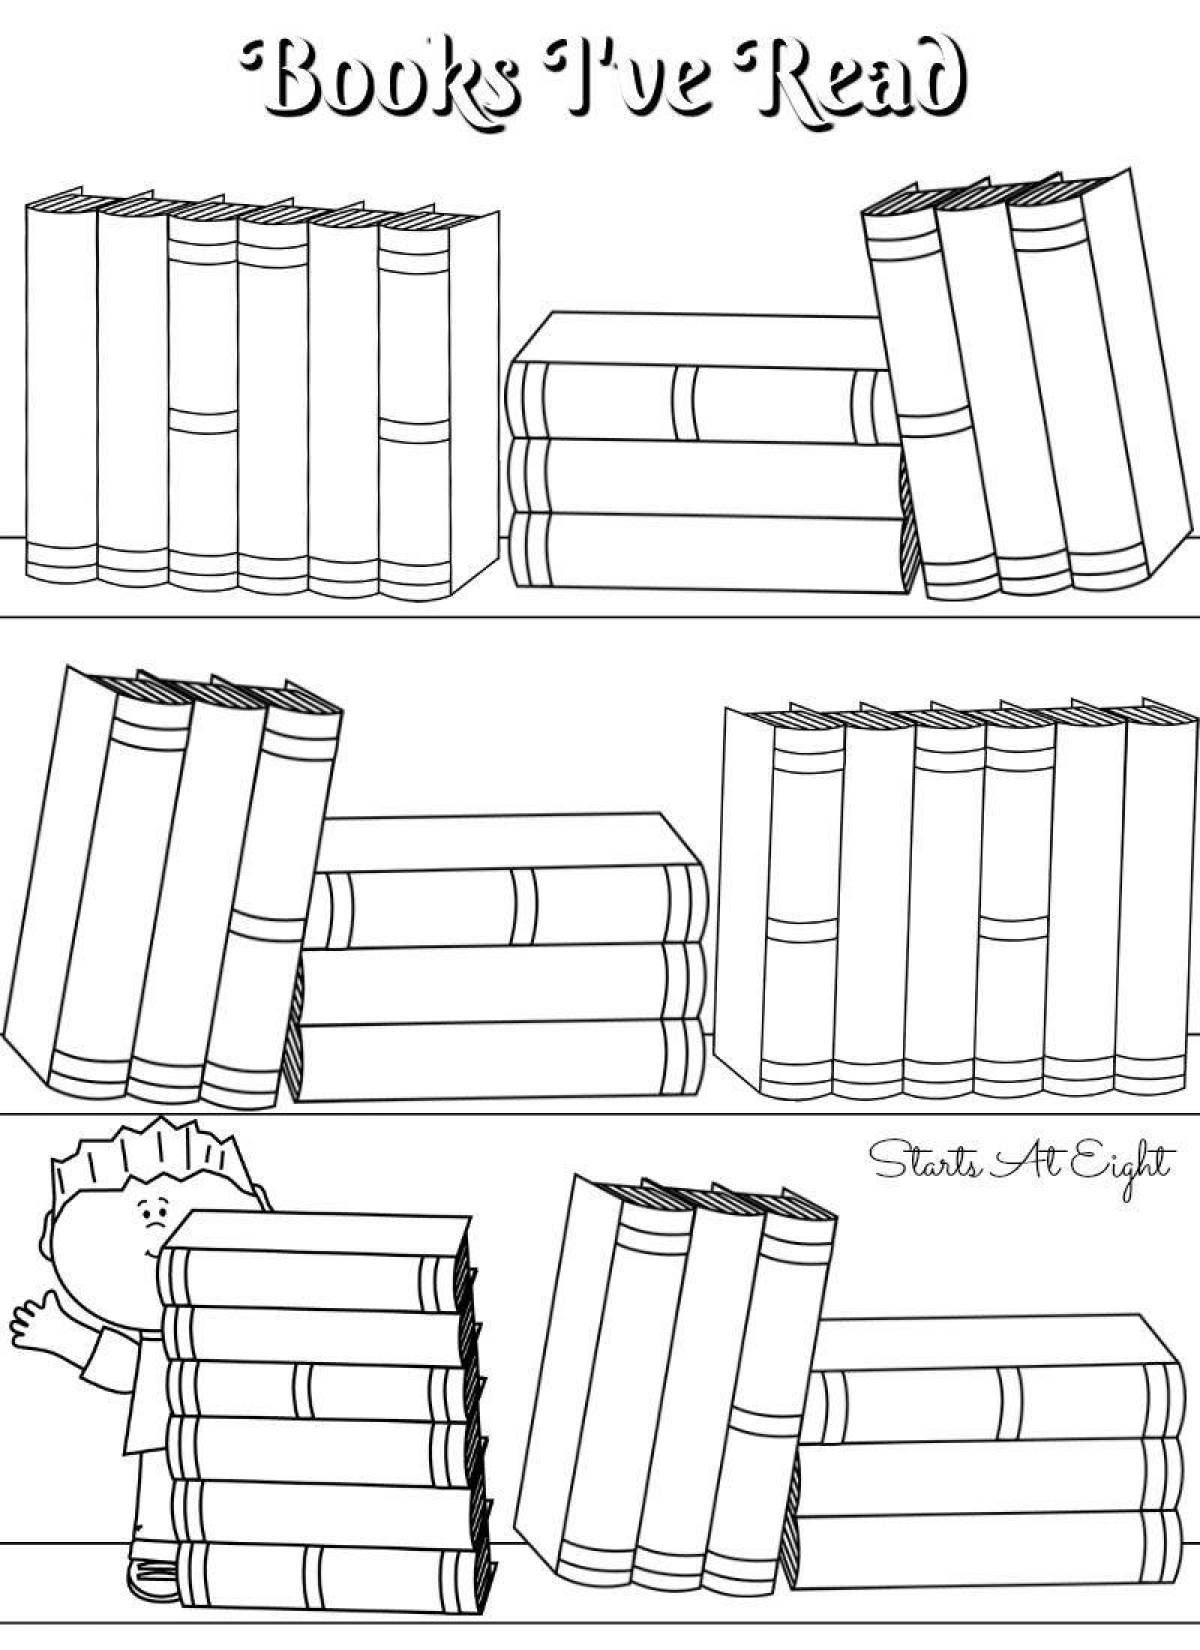 Coloring book exquisite shelf with books